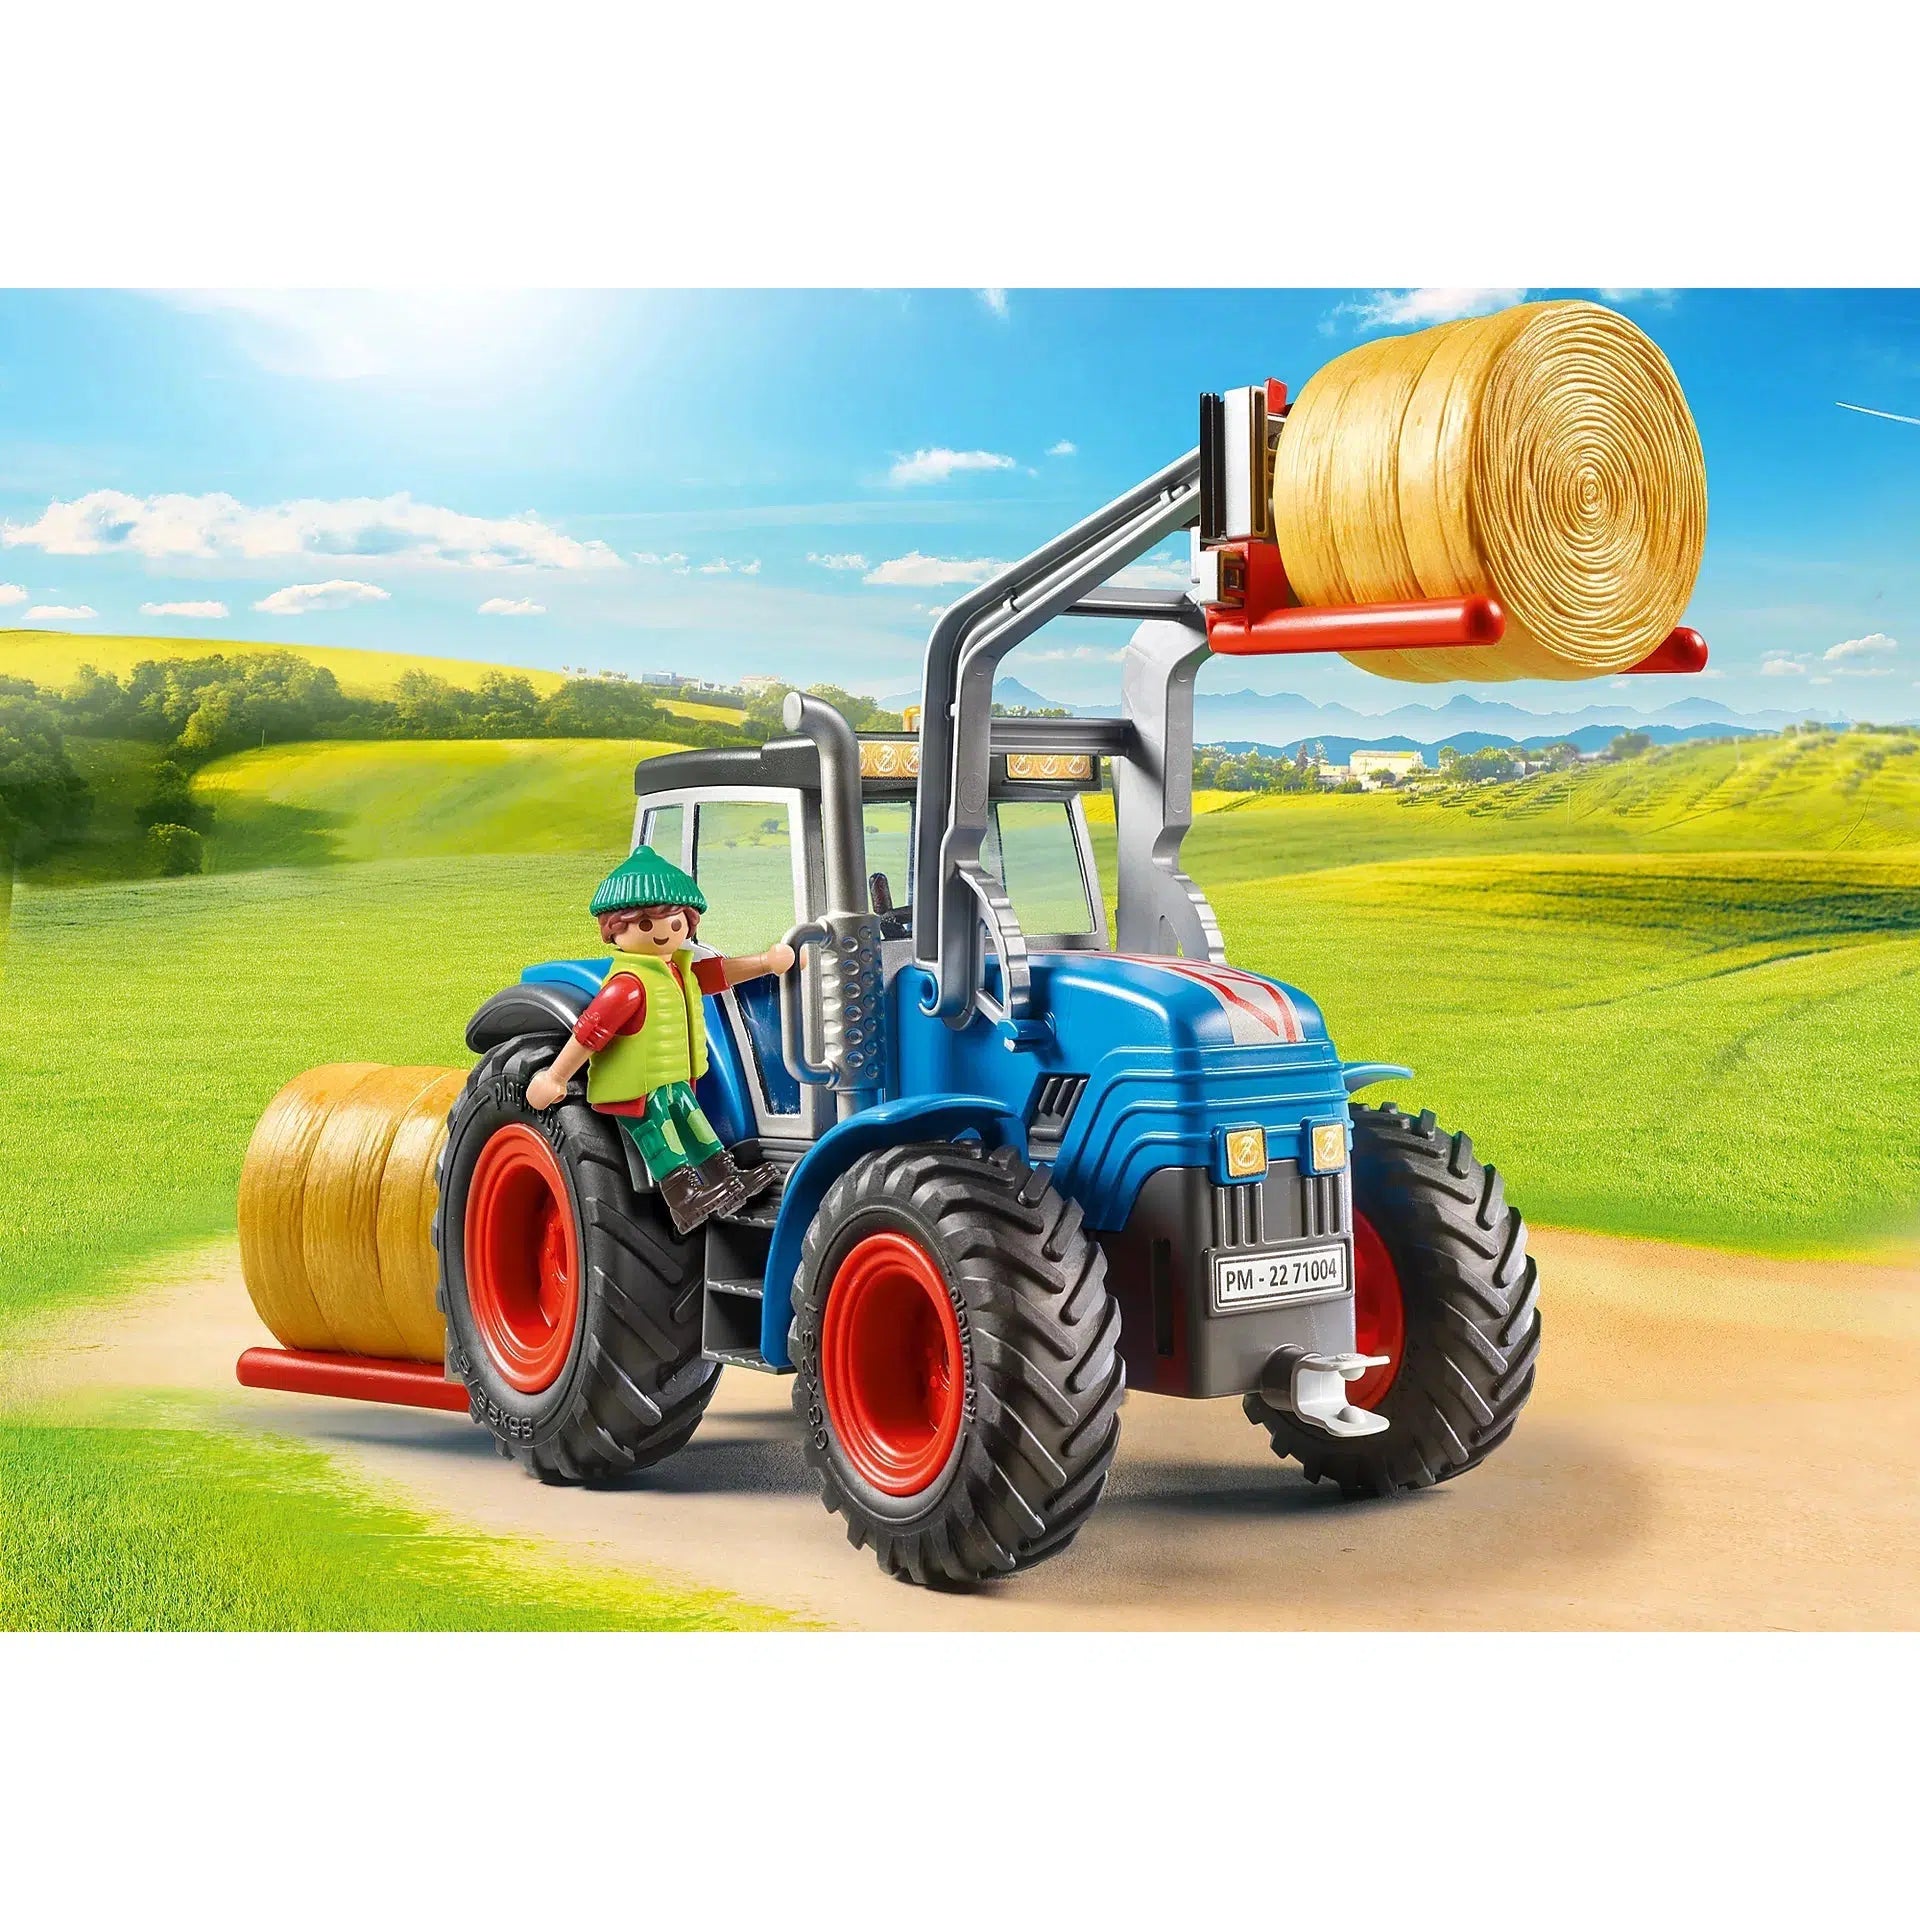 Playmobil-Country - Large Tractor-71004-Legacy Toys